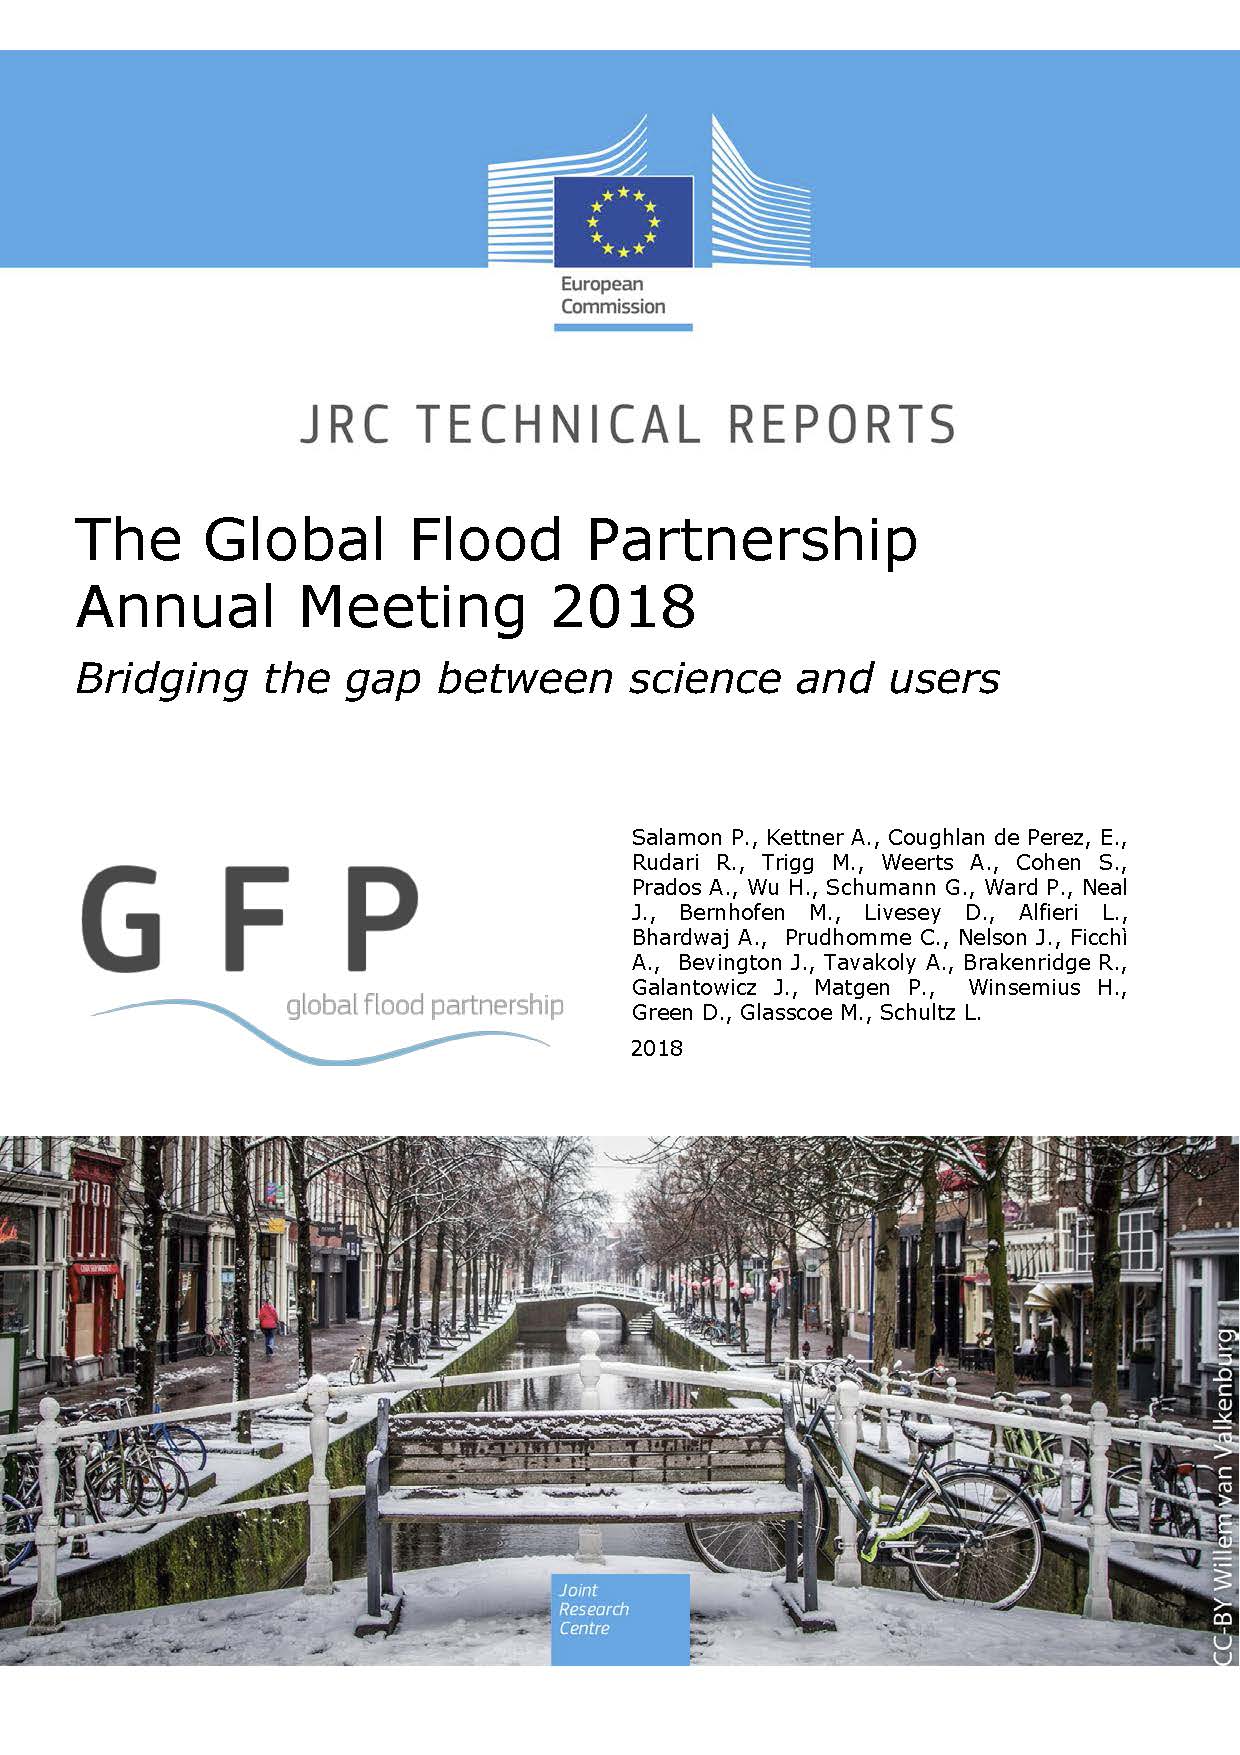 Global Flood Partnership Annual Meeting 2018 report available!